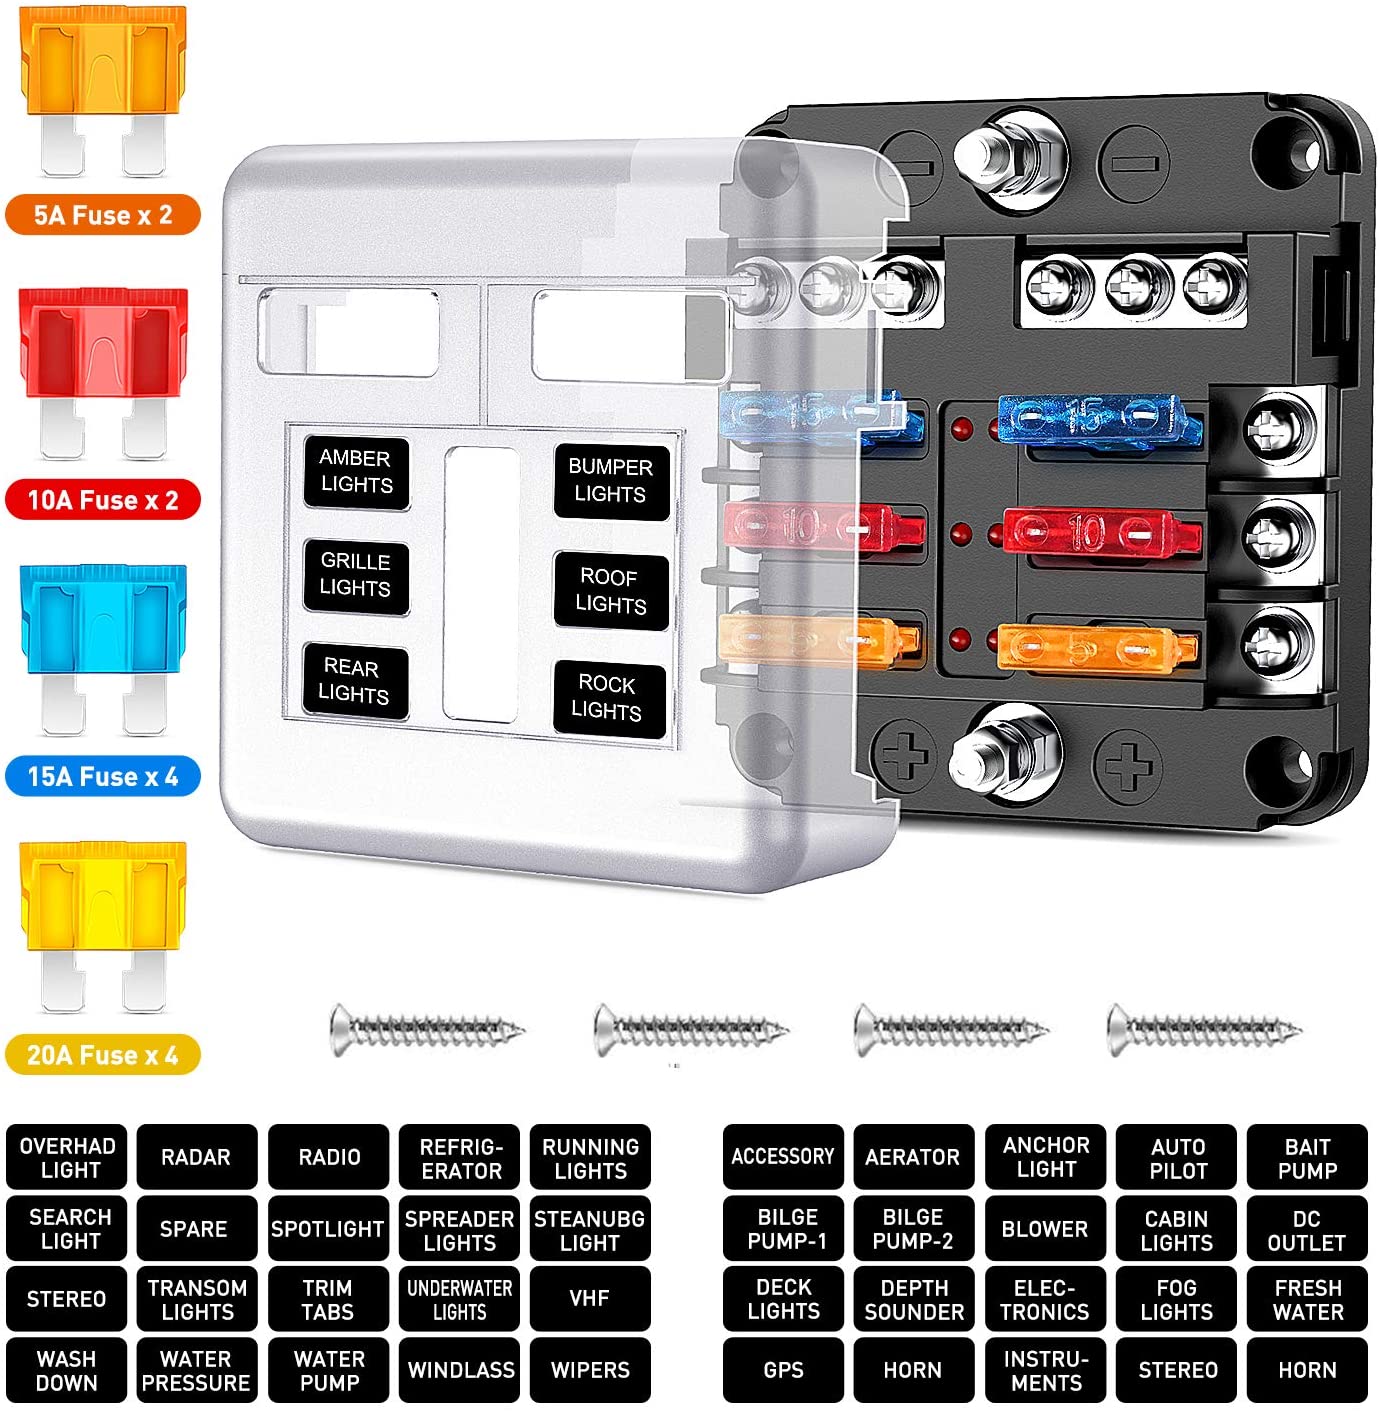 Nilight 6 Way Blade Fuse Block 6 Circuits with Negative Bus Fuse Box Holder with LED Indicator ATO/ATC Fuse Panel Waterproof Cover for 12V Automotive Cars Marine Boats,RVs,Trailers,2 Years Warranty